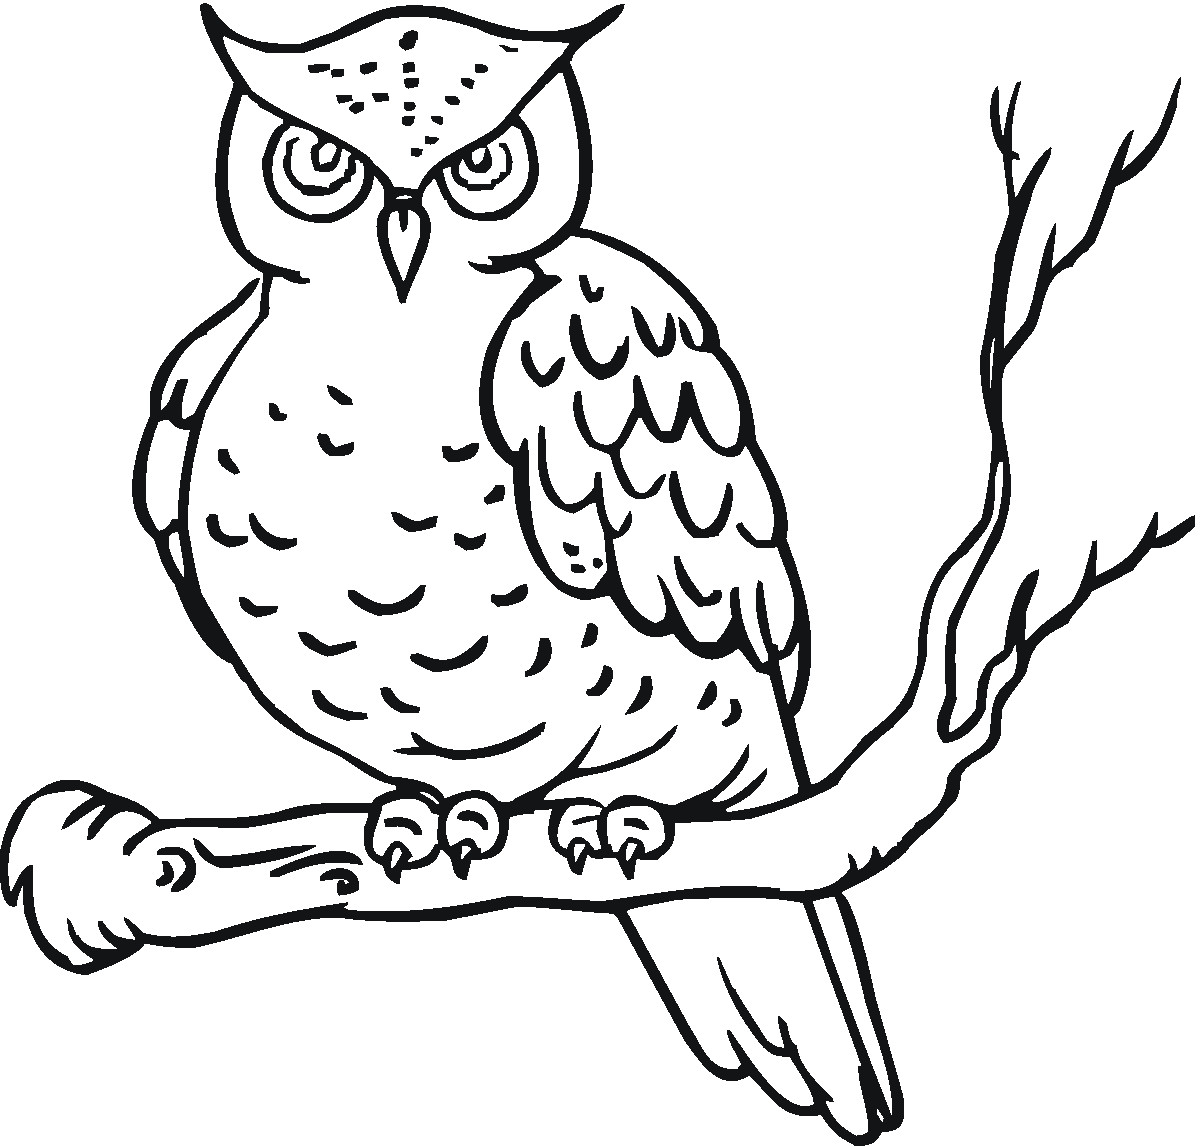 Owl Coloring Pages For Kids
 Owl Coloring Pages Kidsuki